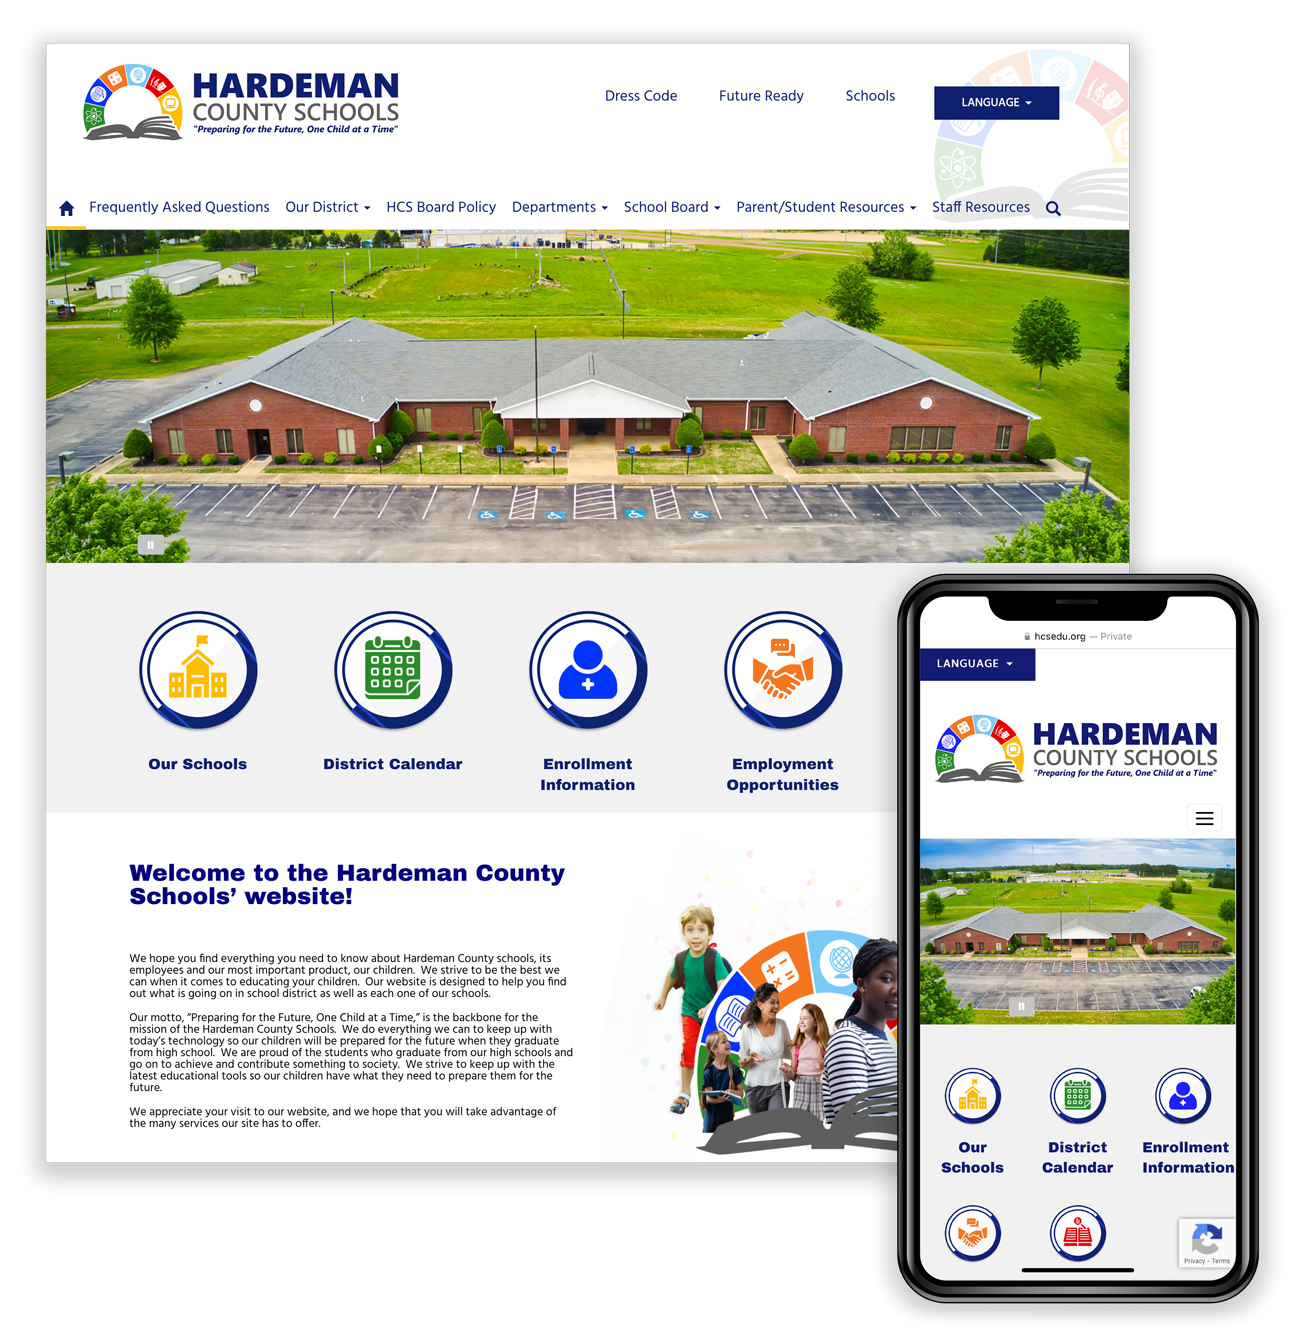 Hardeman County Schools website on web and mobile